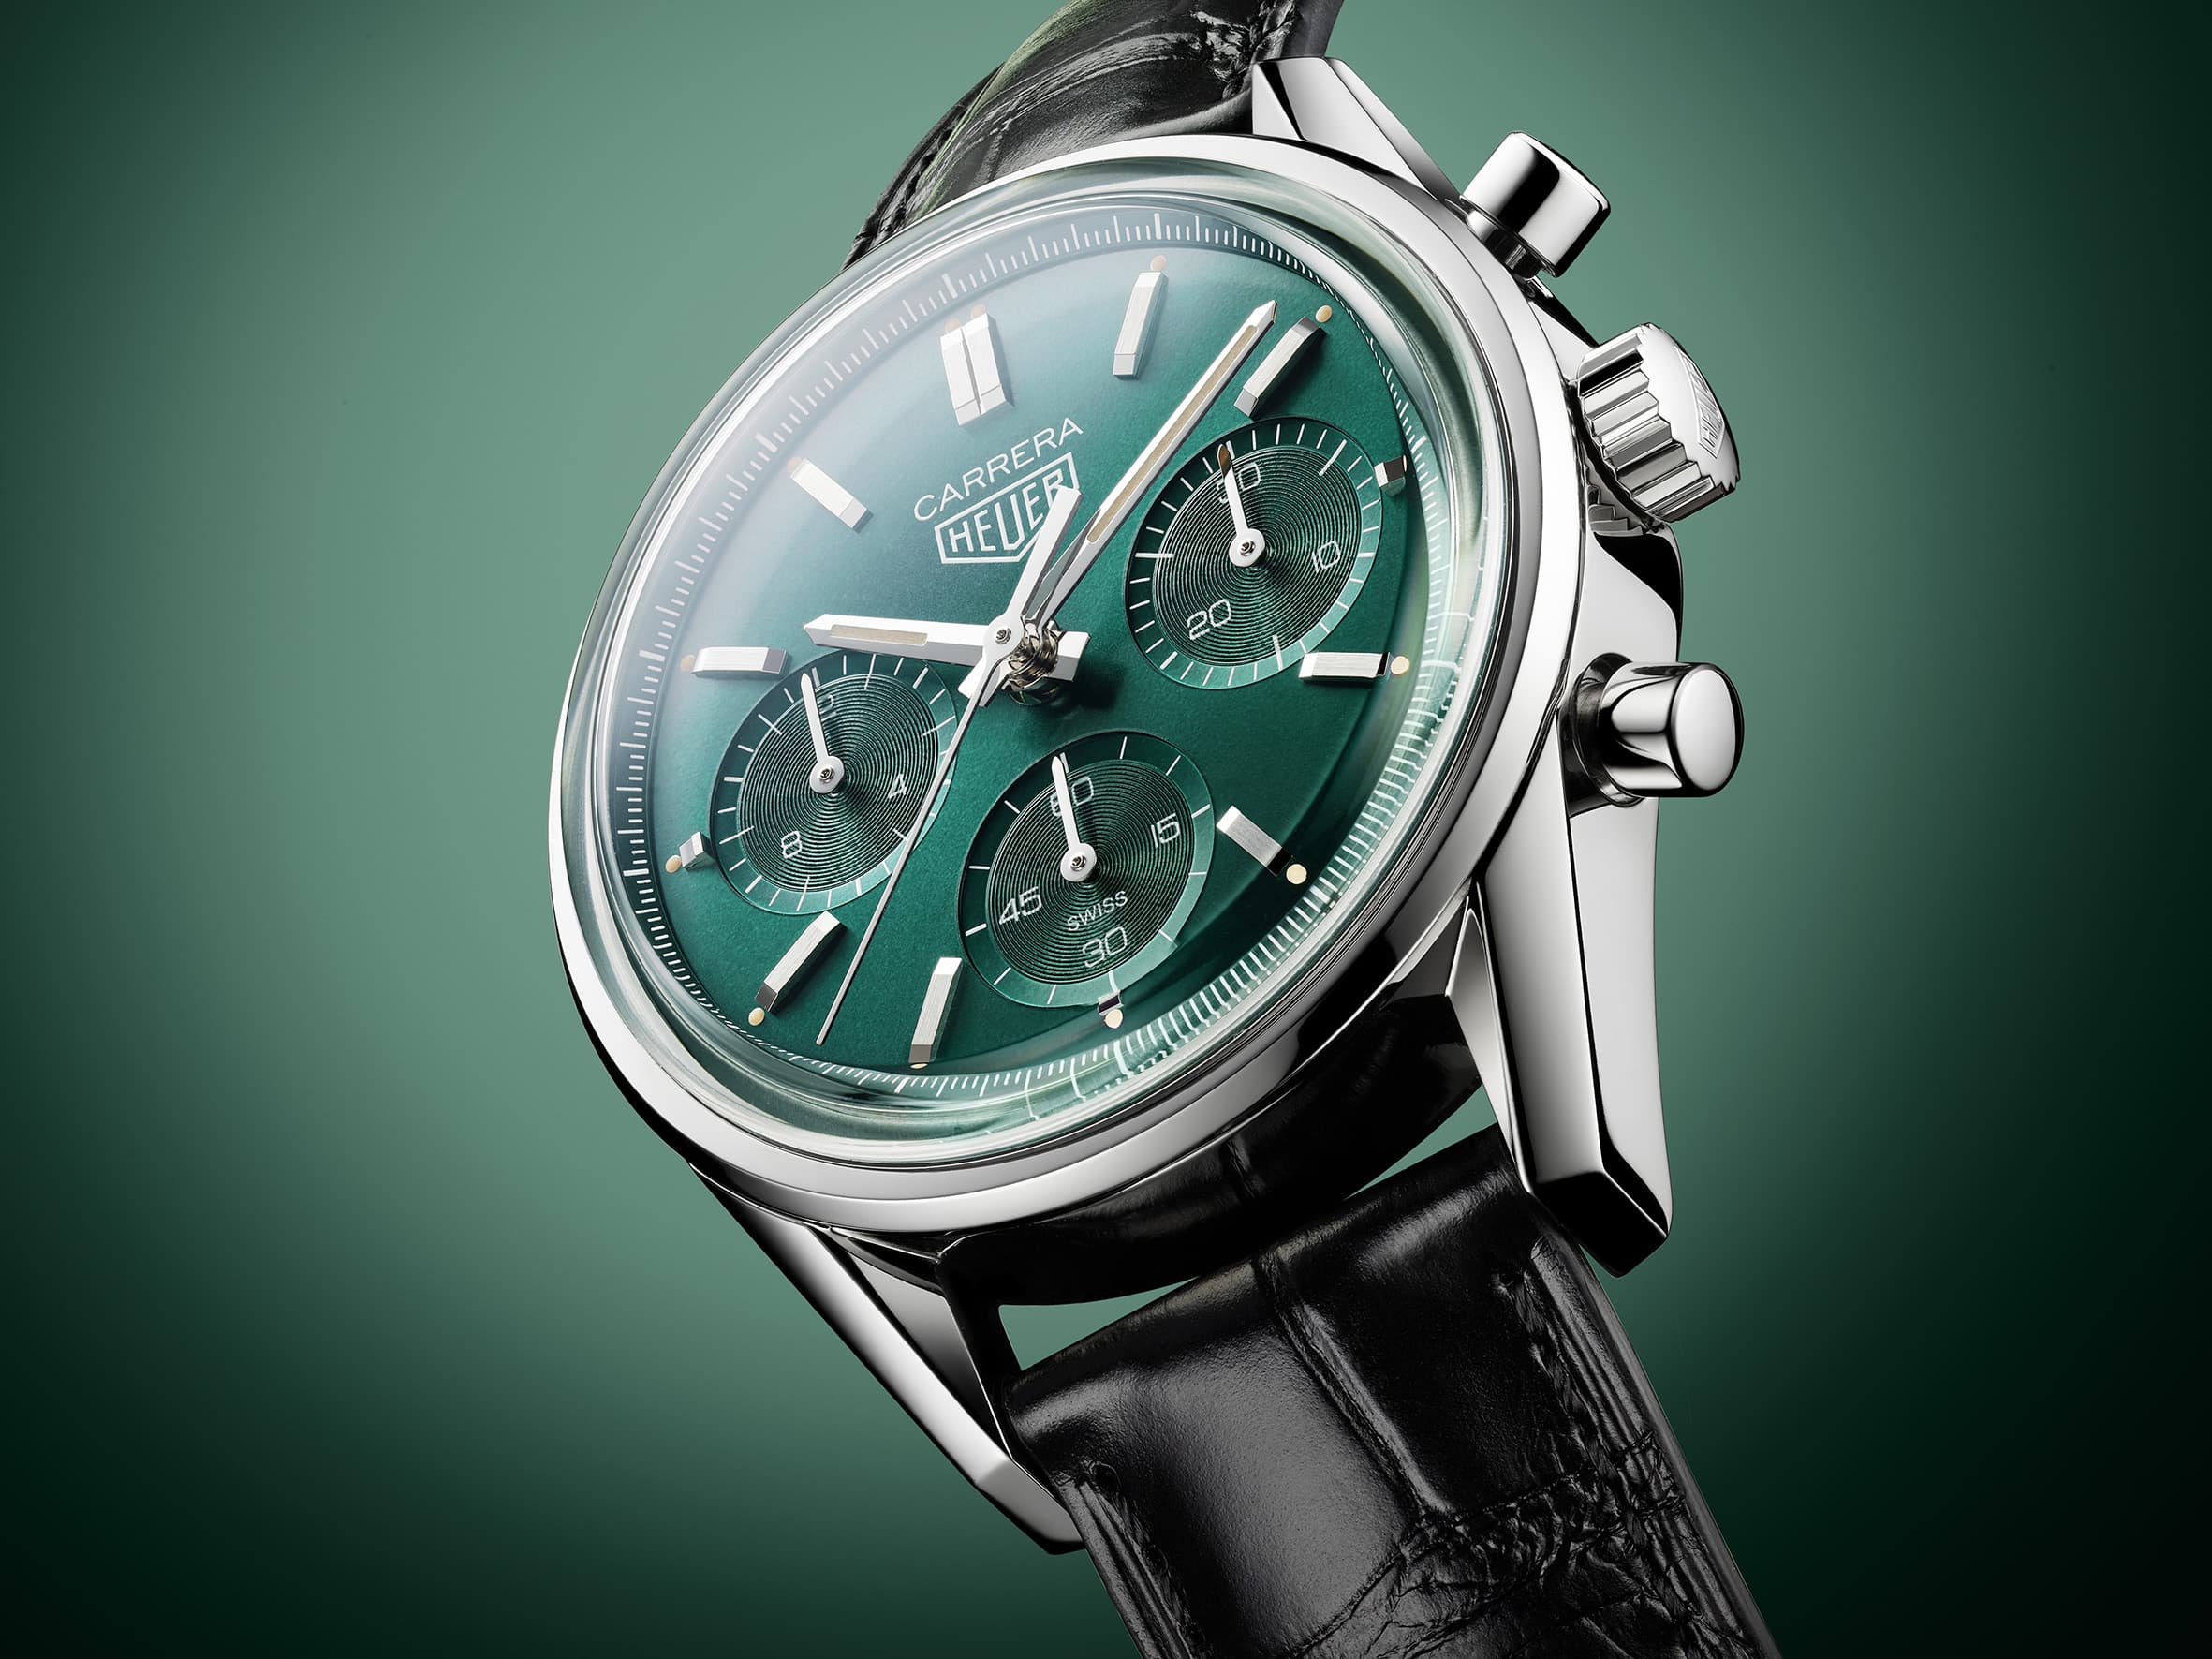 Introducing the TAG Heuer Carrera Green Limited Edition